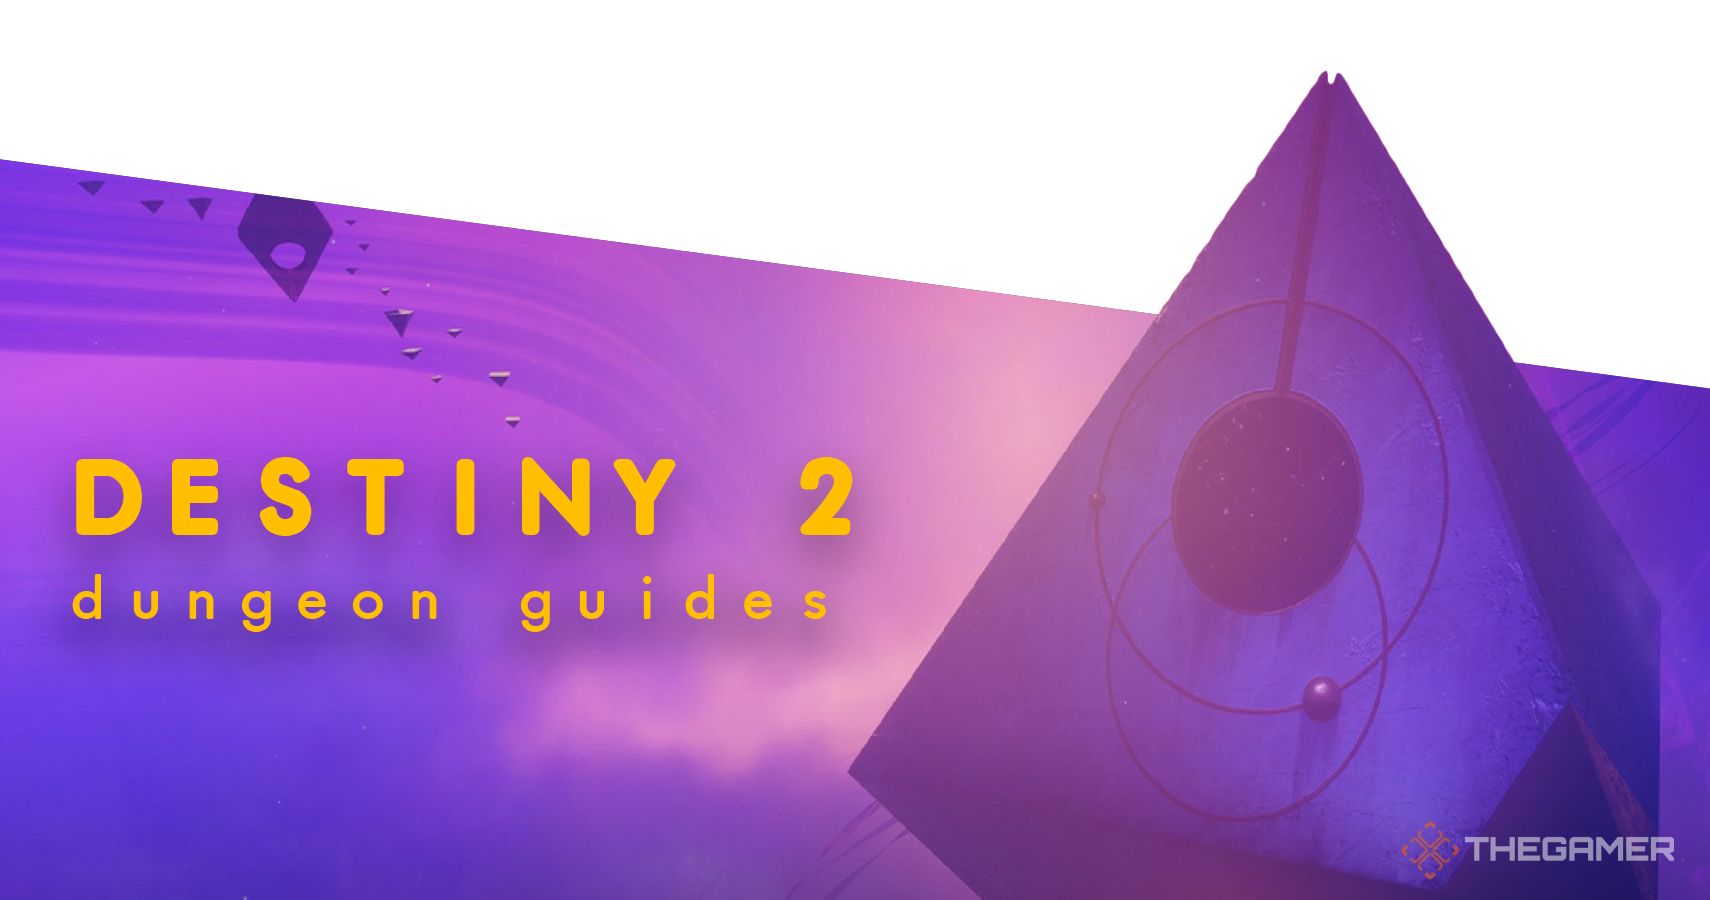 Destiny 2 dungeon guides